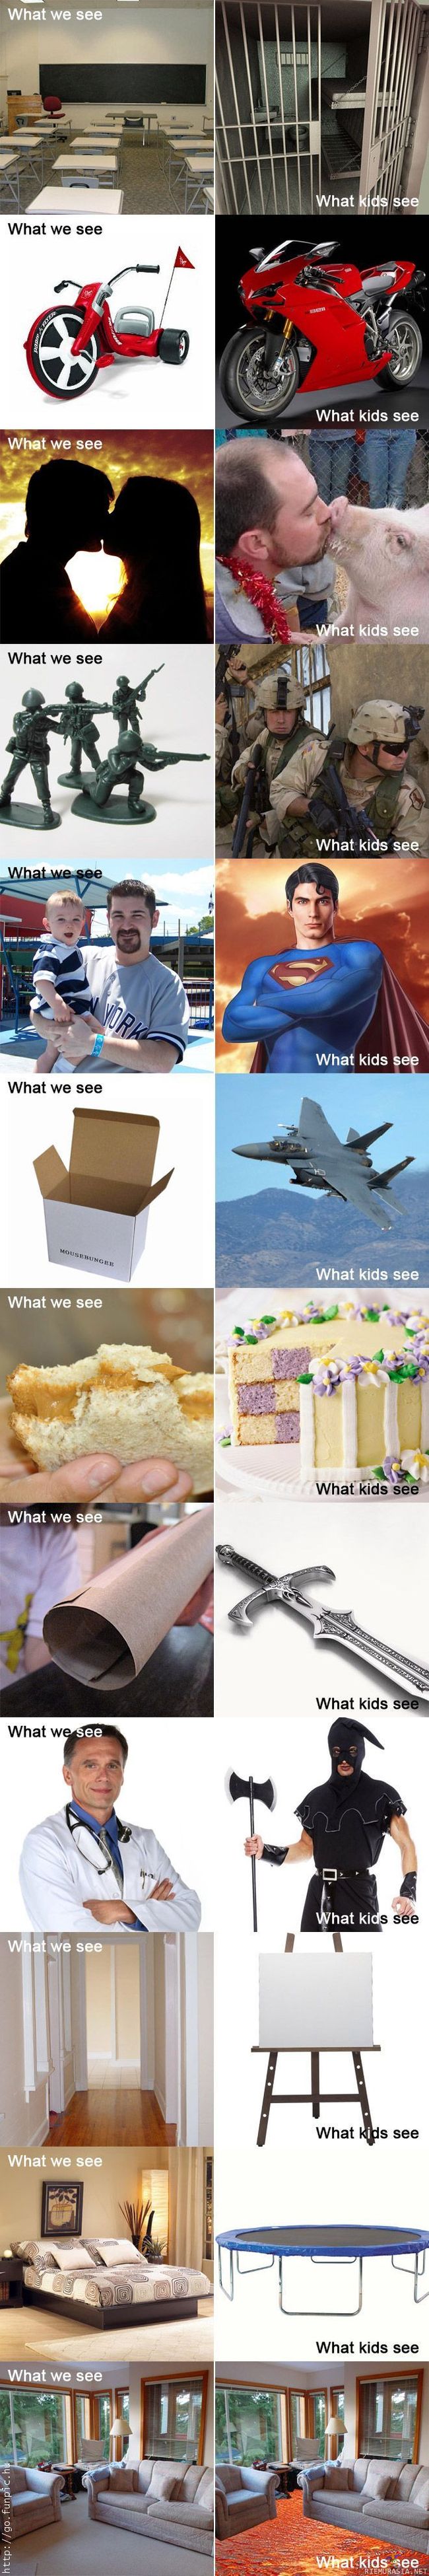 what we see, what kids see